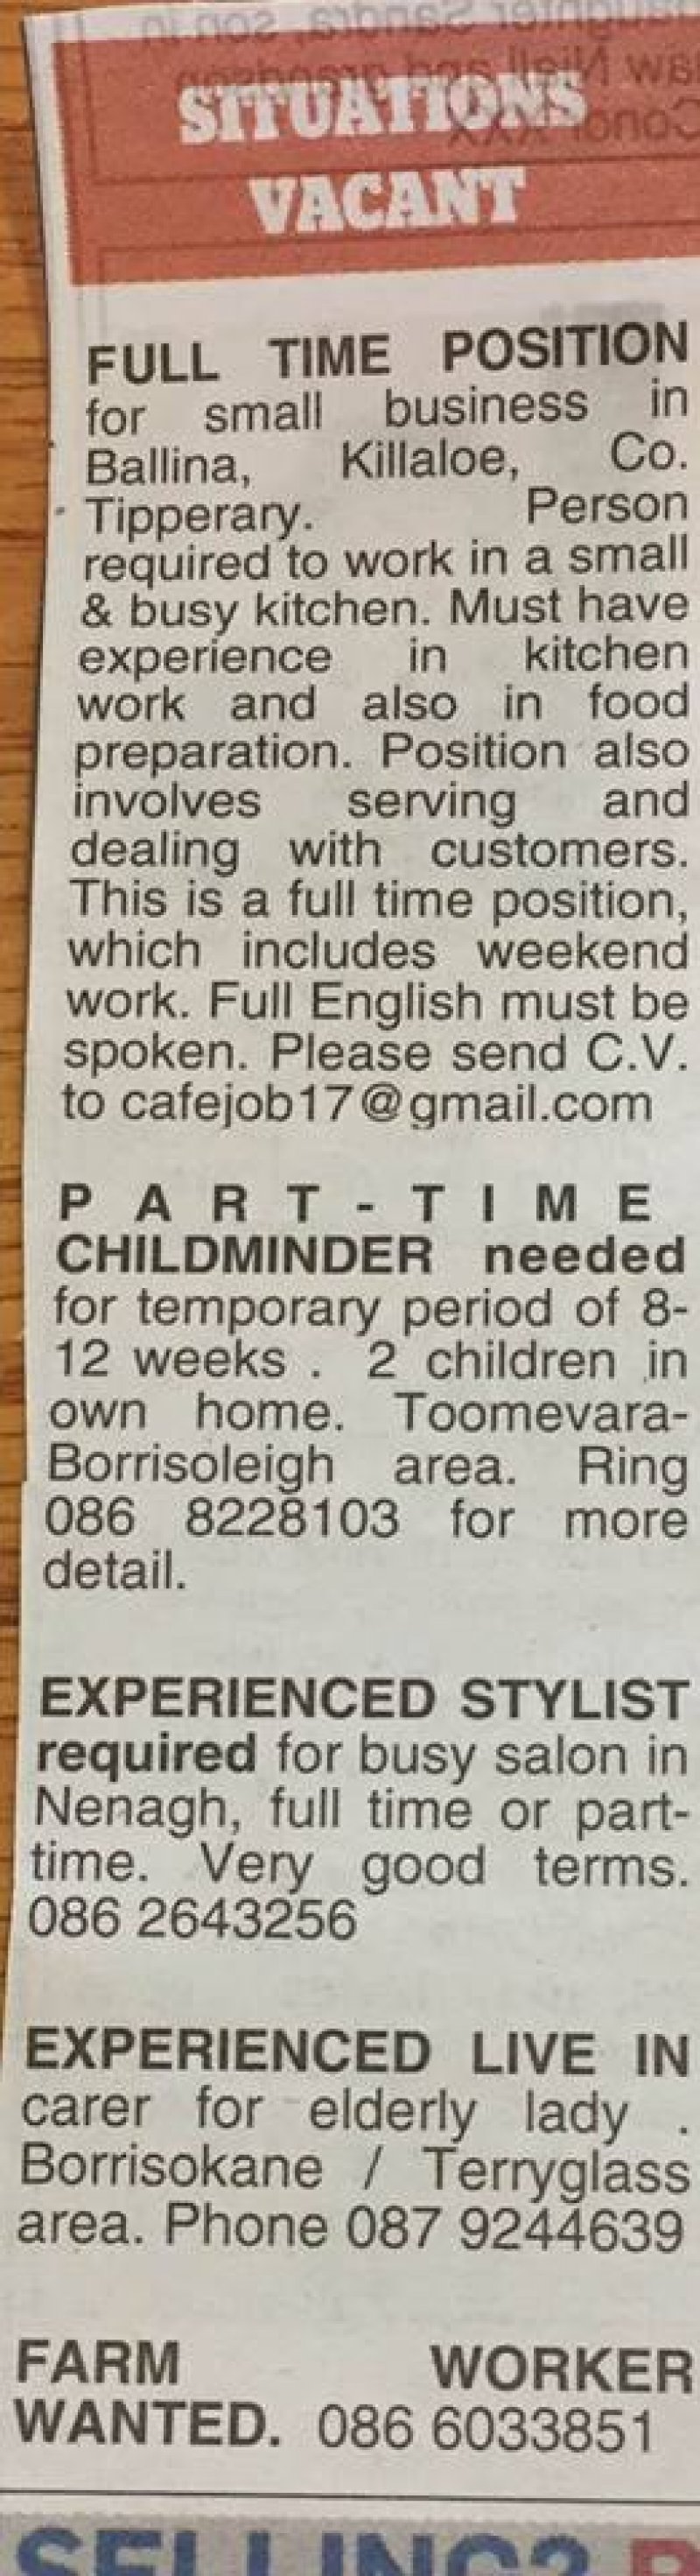 Nenagh Guardian - Situations Vacant 2